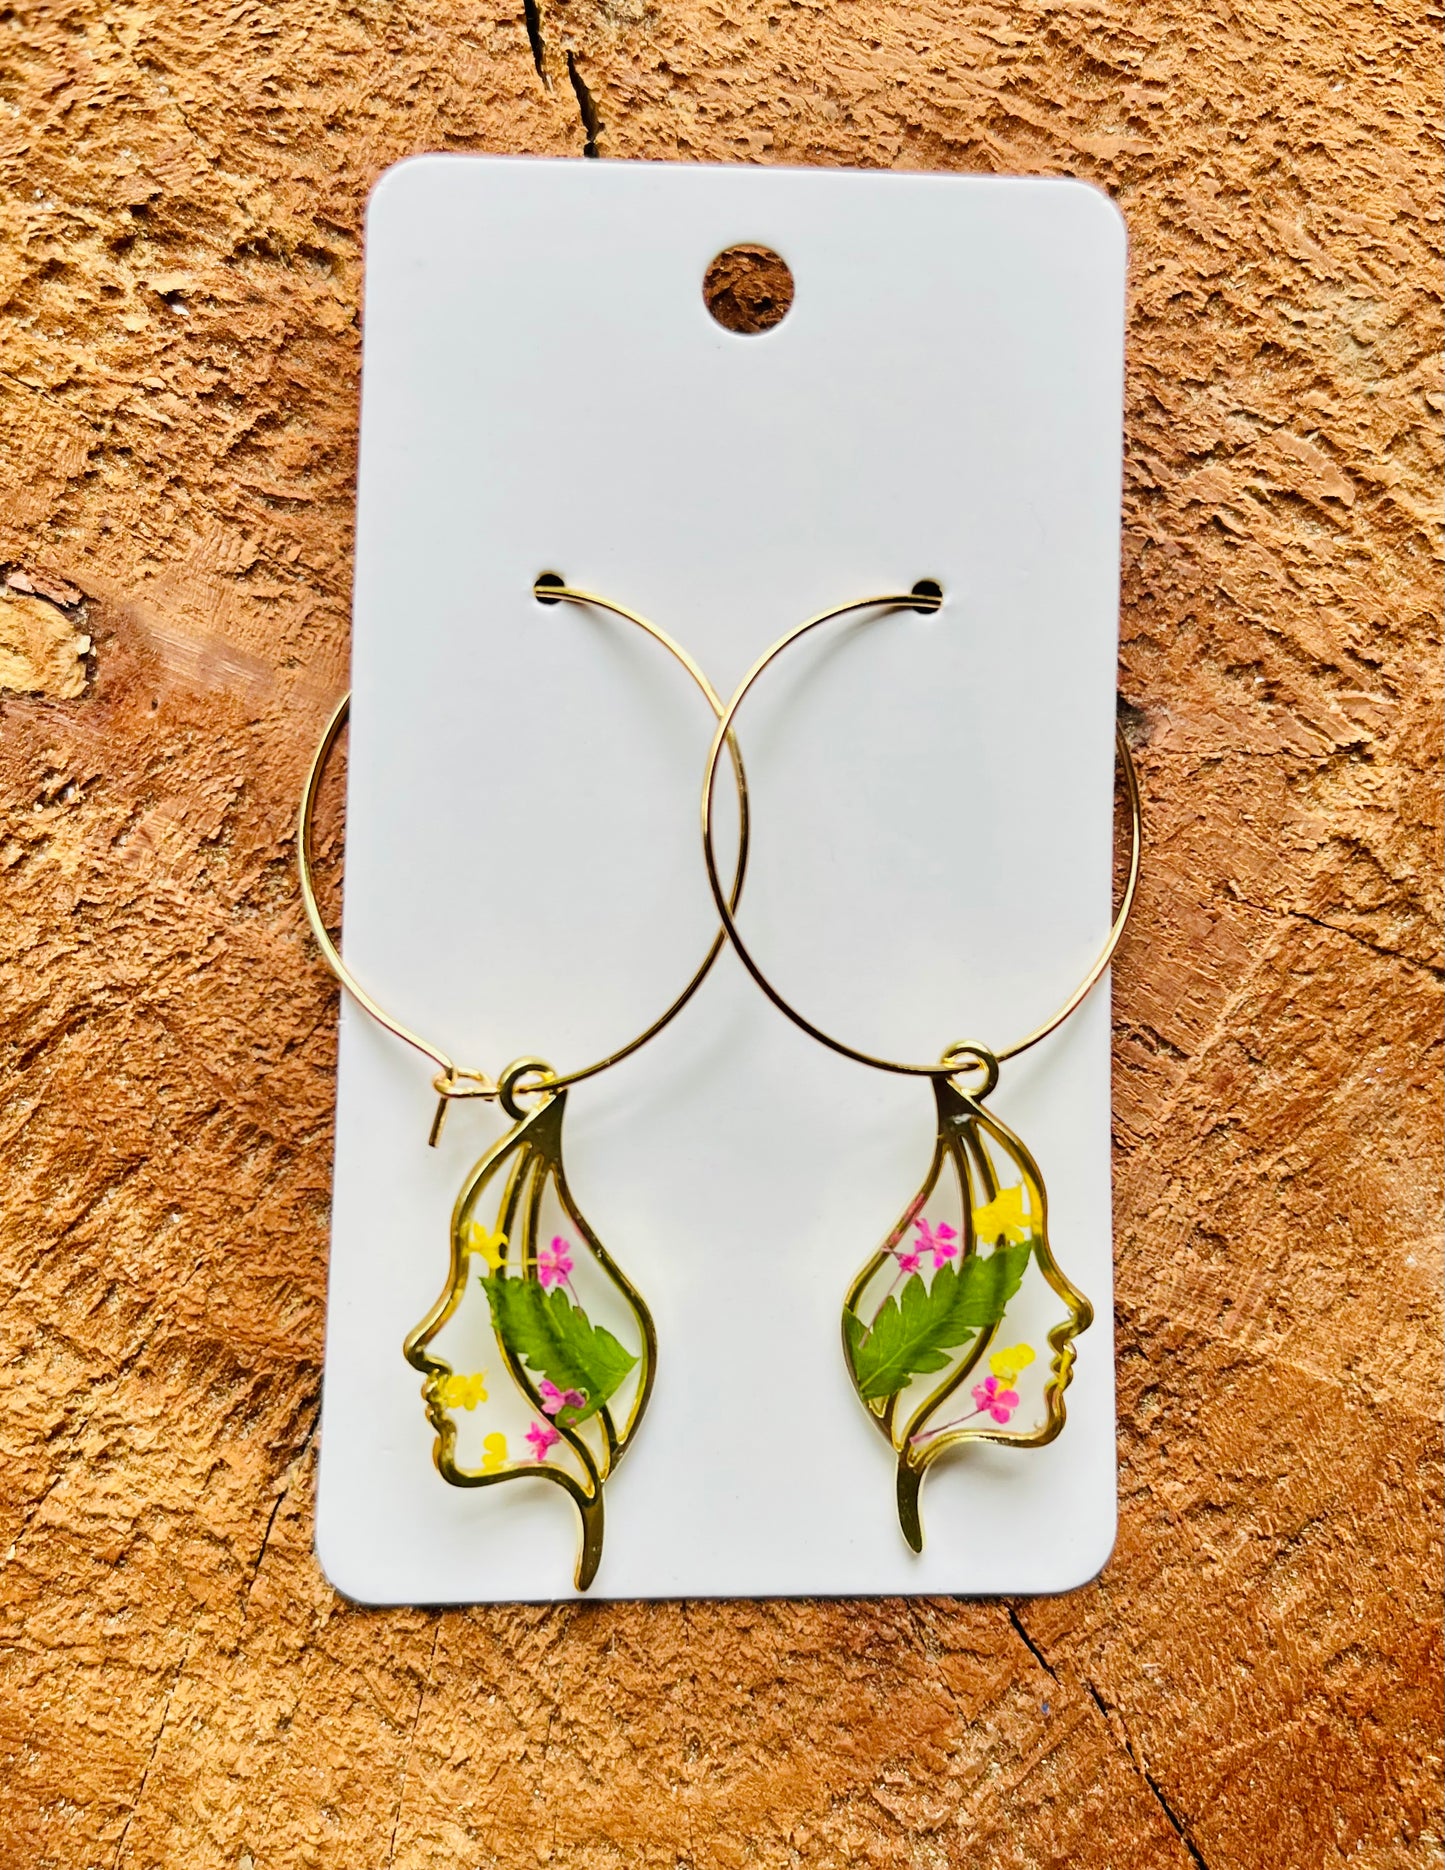 Handmade earrings with real ferns, made real pressed flowers. A truly unique gift. Hypoallergenic. 18K Gold.